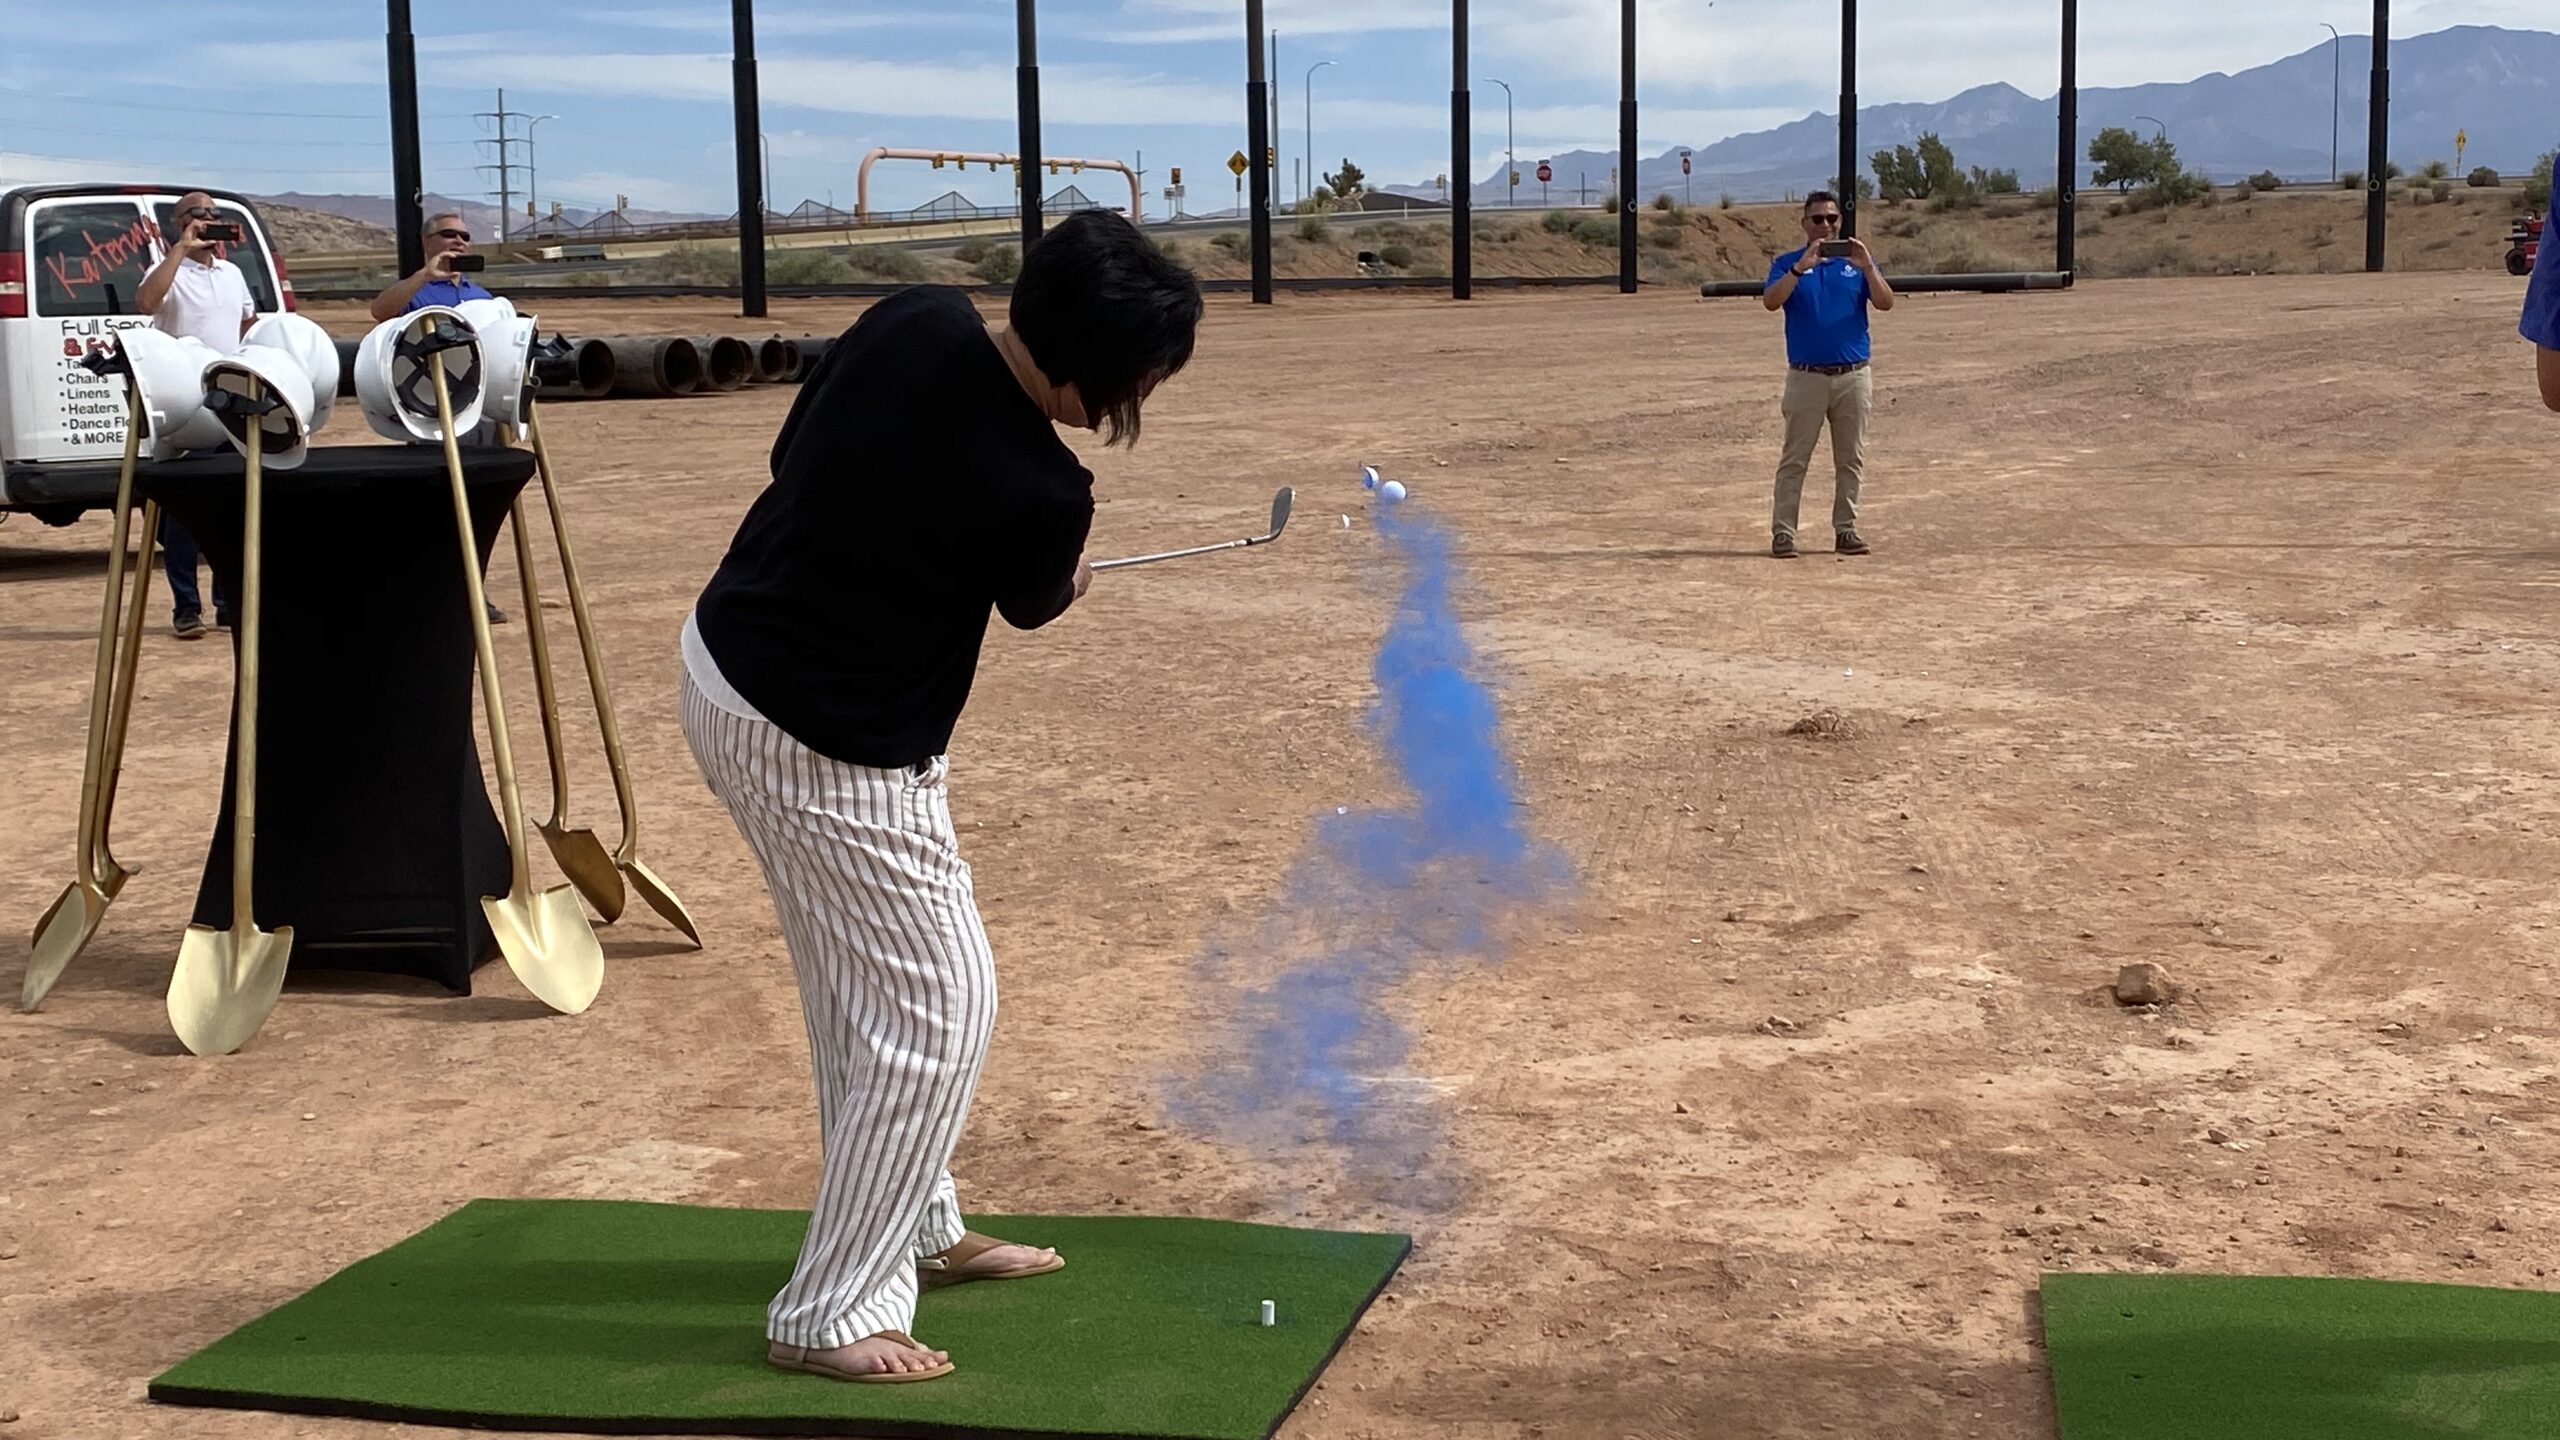 BigShots Golf is changing the stodgy narrative of the game